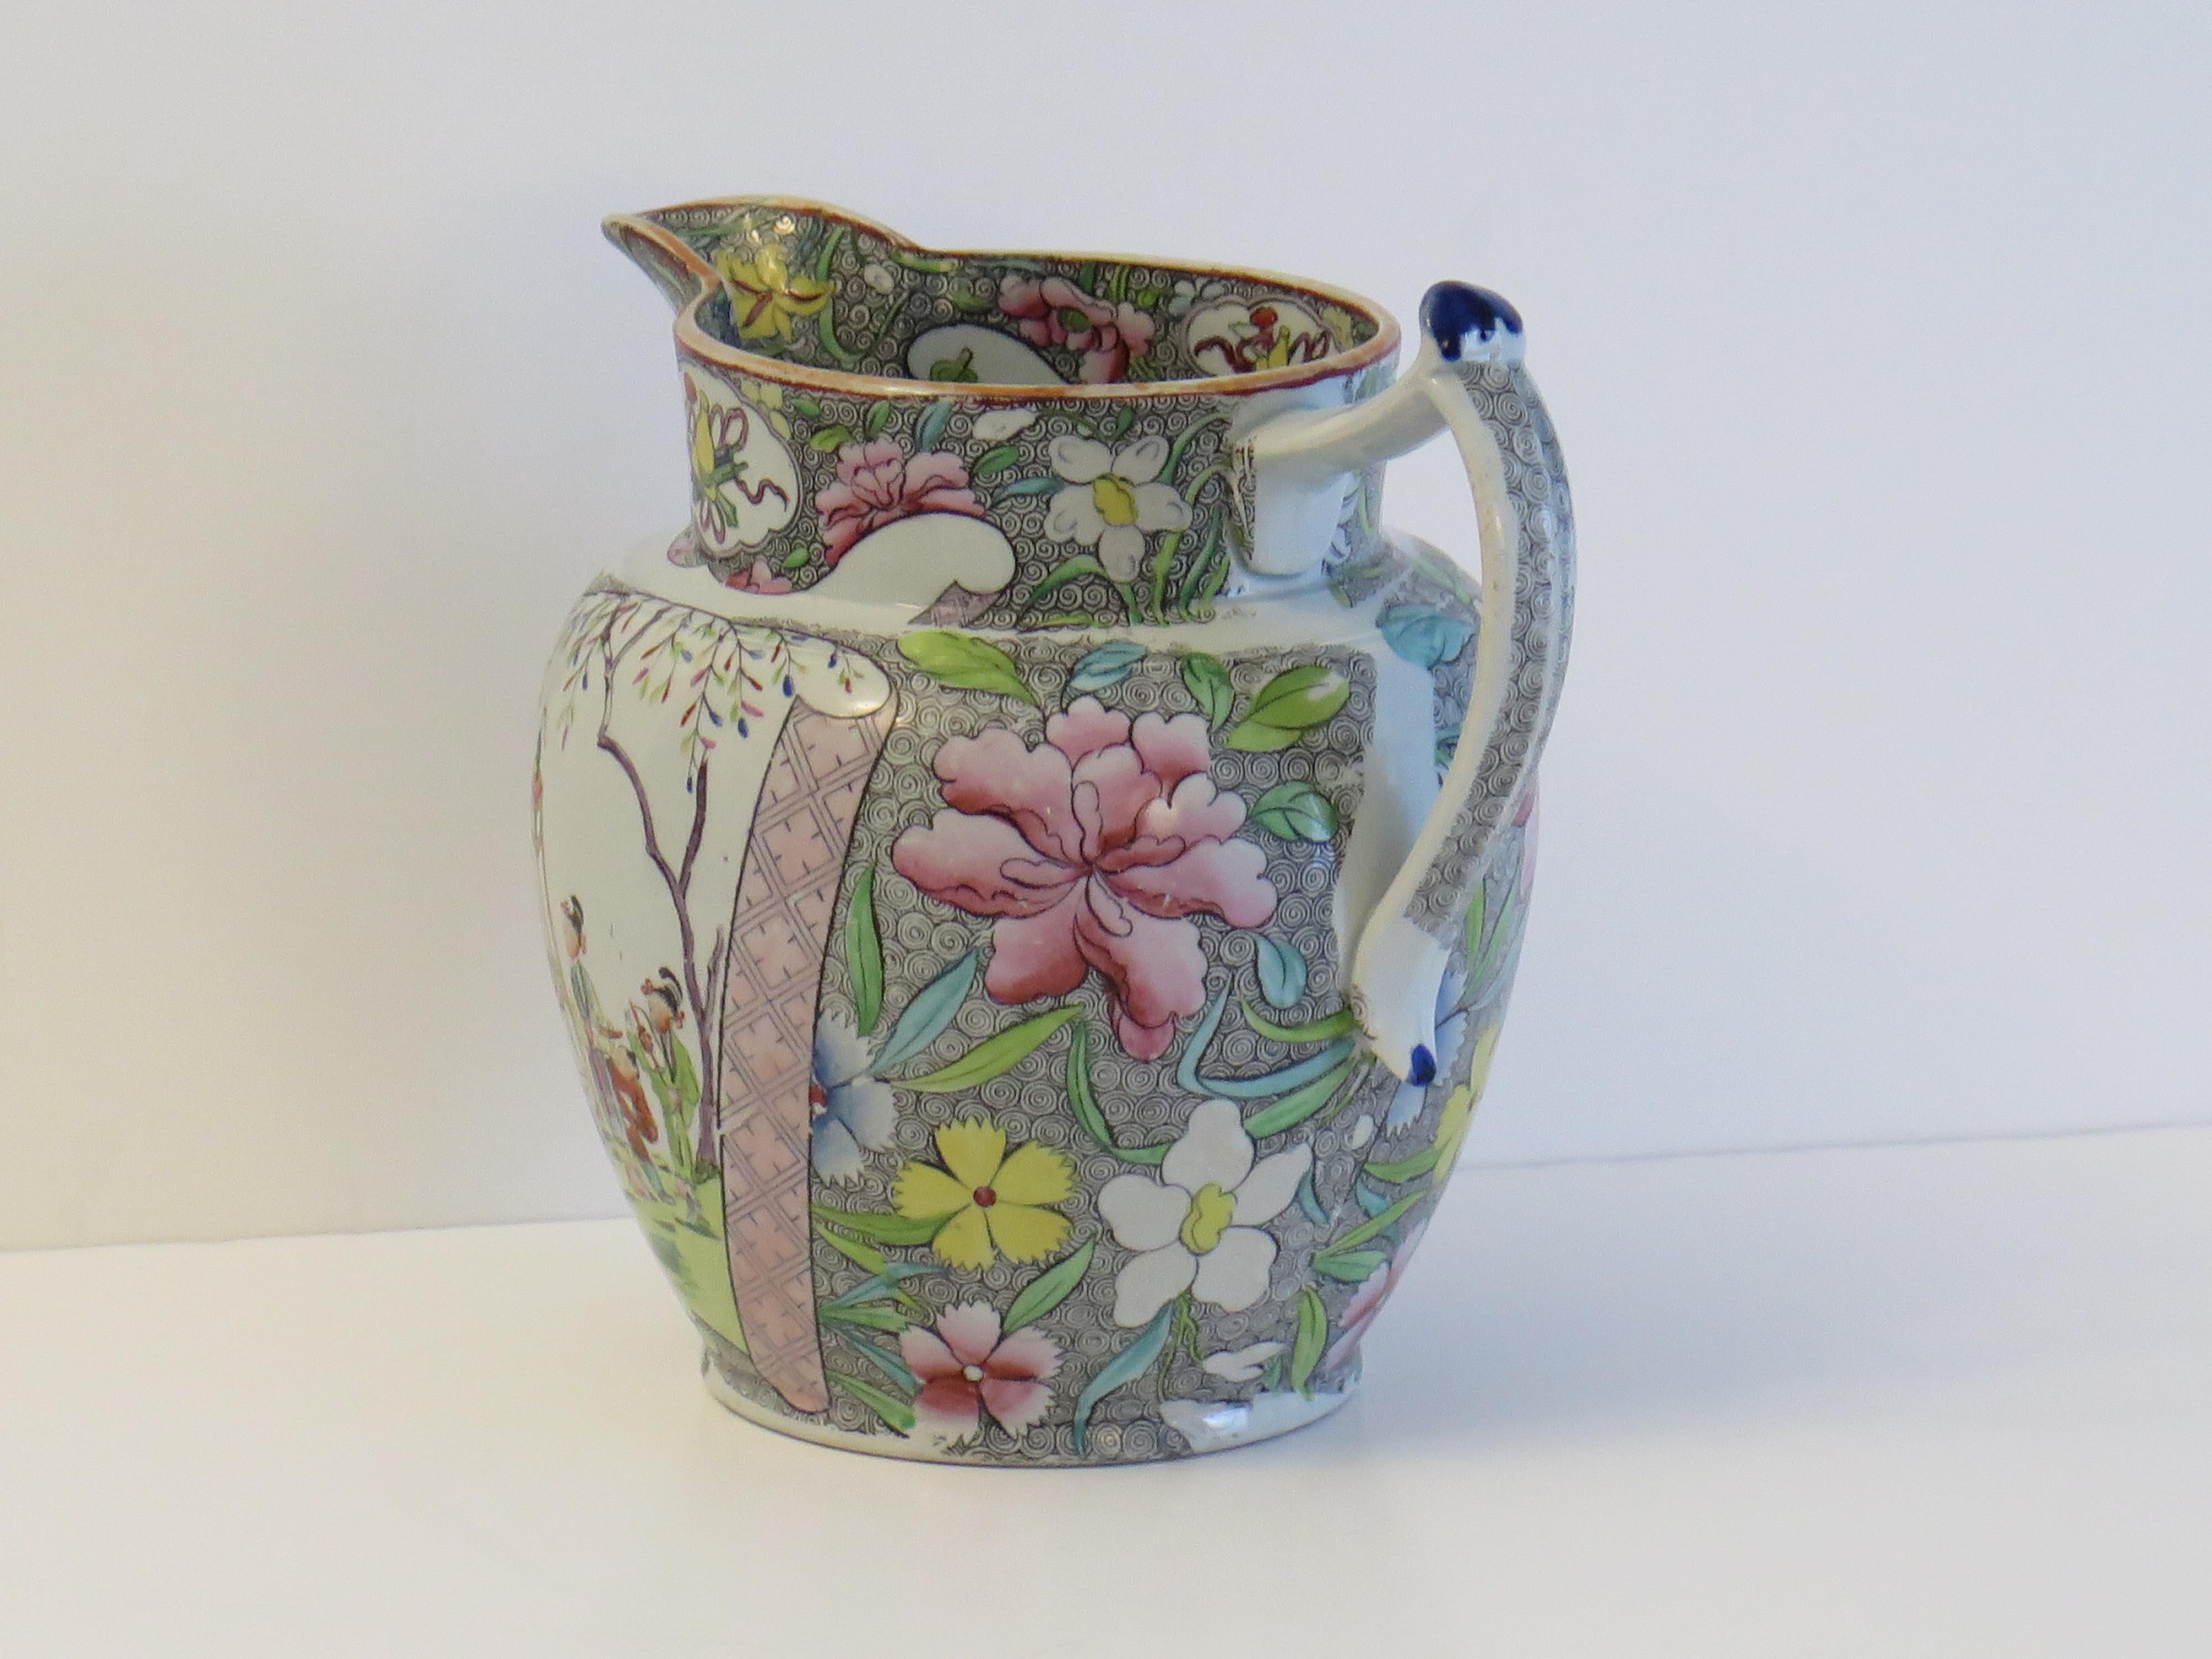 Hand-Painted Georgian Mason's rare Ironstone Jug or Pitcher in Chinese Scroll Ptn, circa 1818